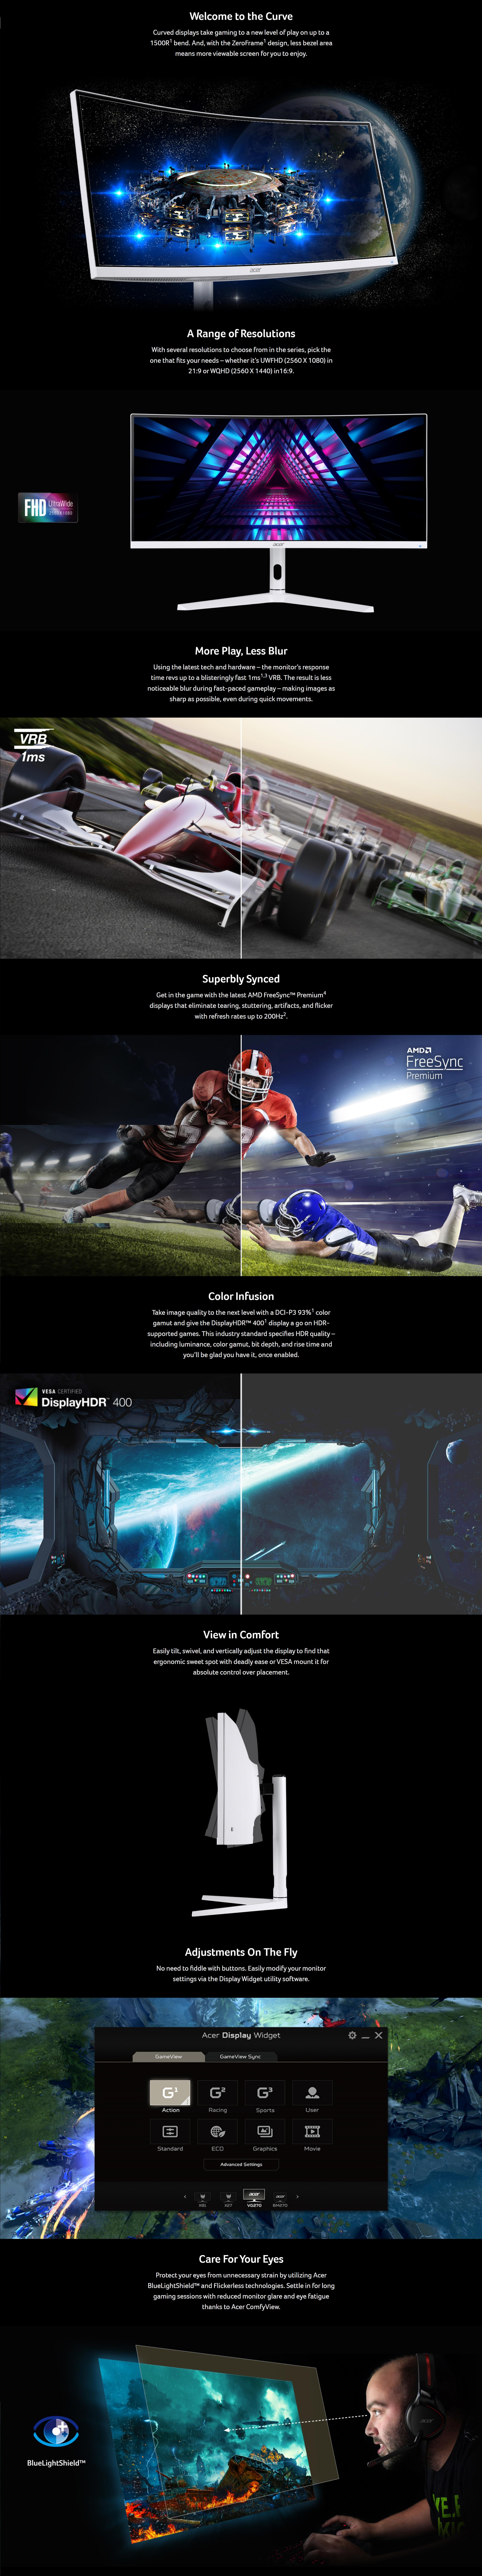 A large marketing image providing additional information about the product Acer Nitro XZ396QUP 38.5" Curved QHD 170Hz VA Monitor - Additional alt info not provided